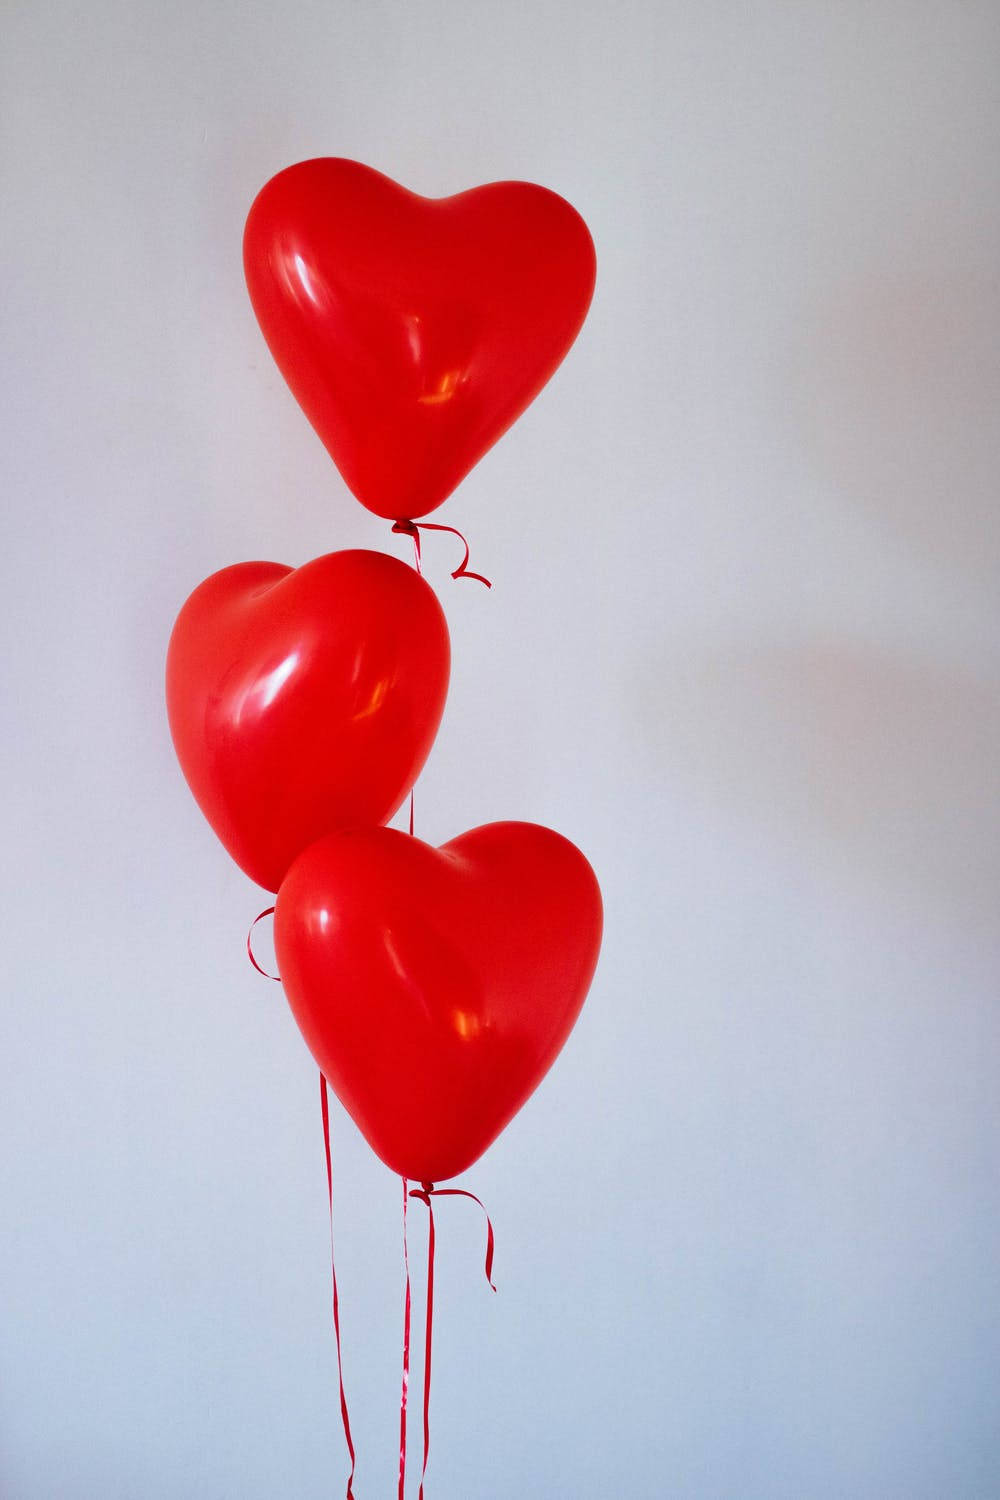 Heart Aesthetic Red Balloons Background